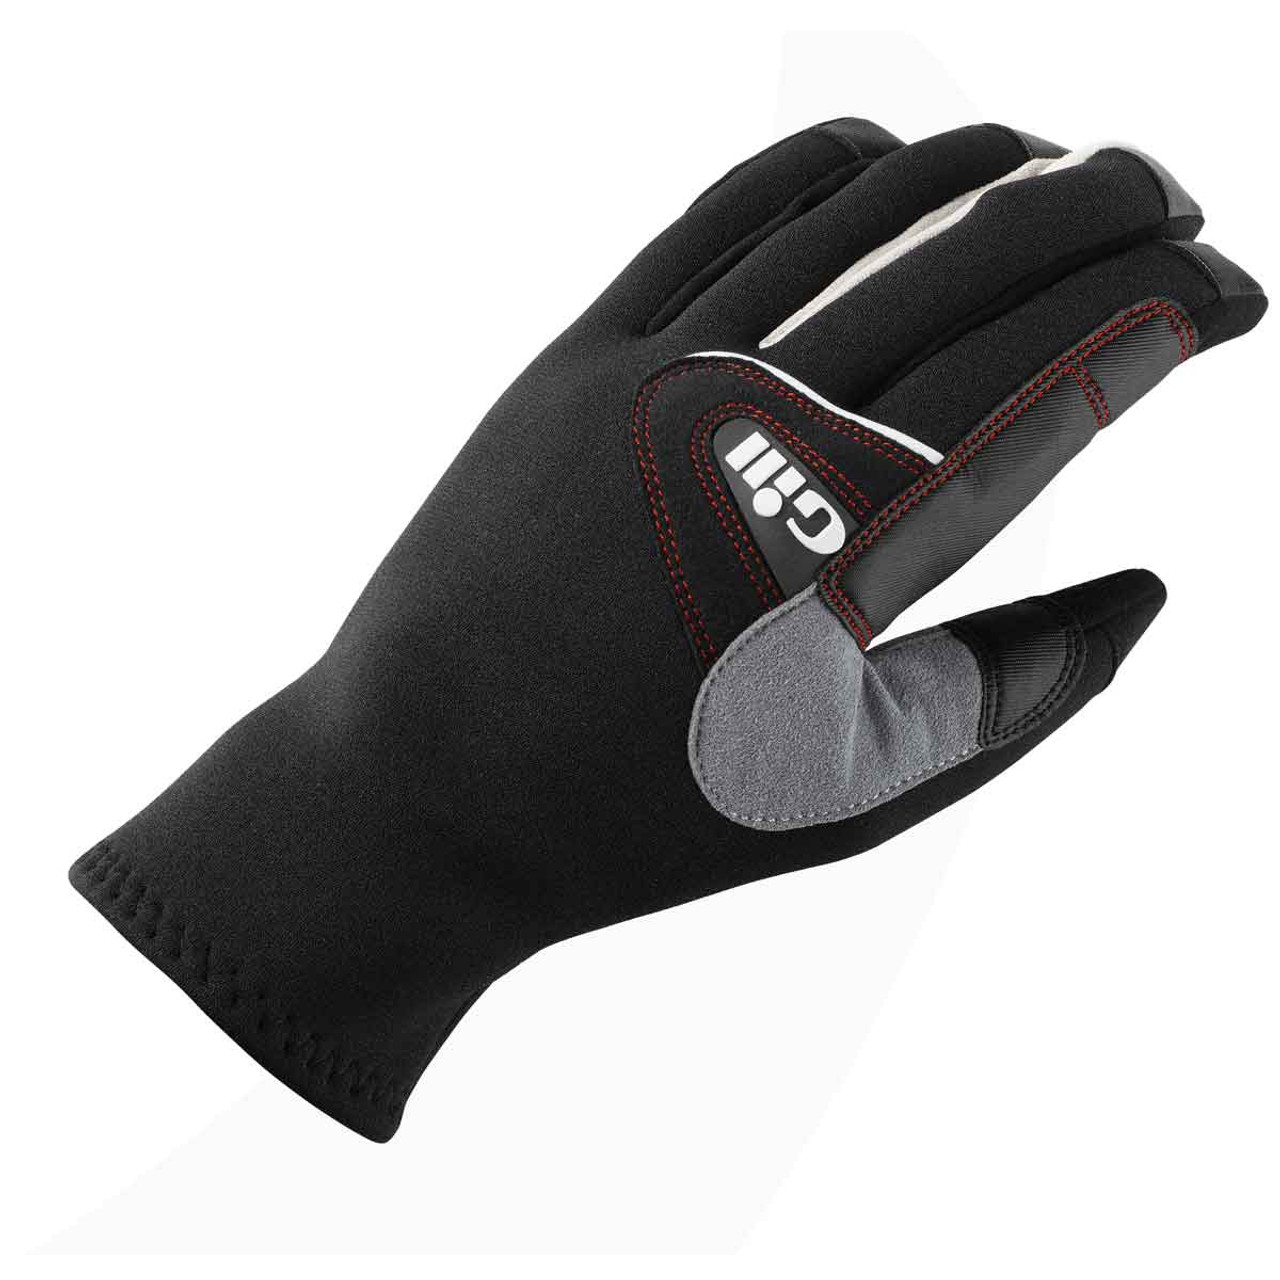 Zhik Tacticle, 3-pack (Sticky glove)